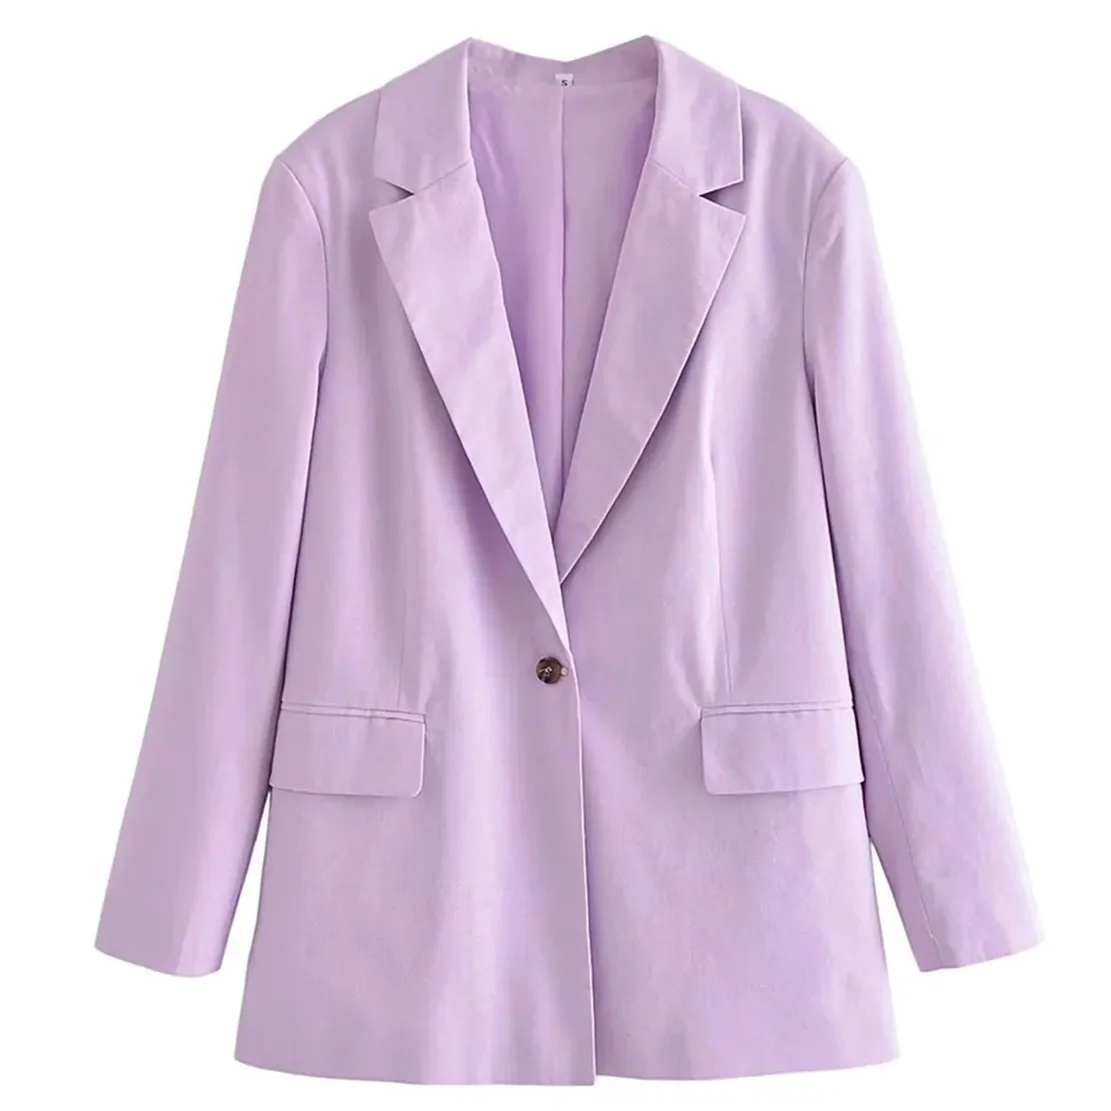 

Maxdutti England Style Fashion Violet Linen Single Breasted Loose Jackets Casual Blazers Women Tops